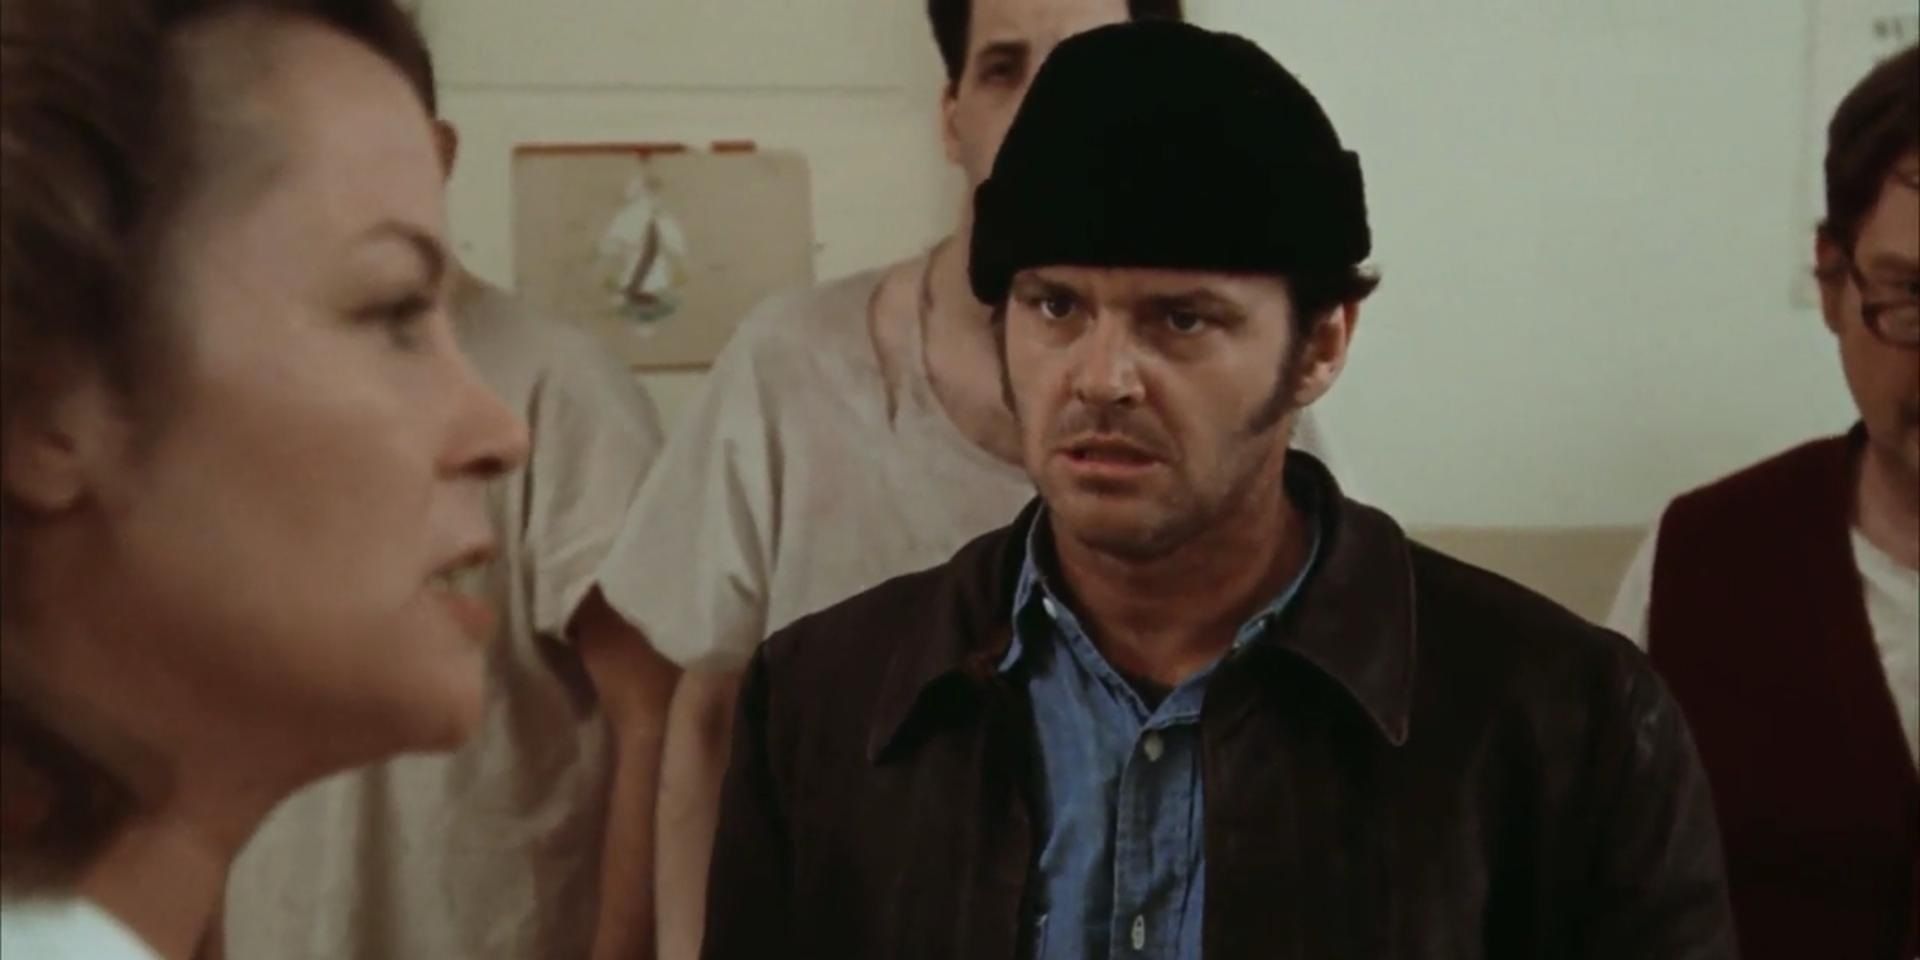 Jack Nicholson as McMurphy in One Flew Over the Cuckoo's Nest